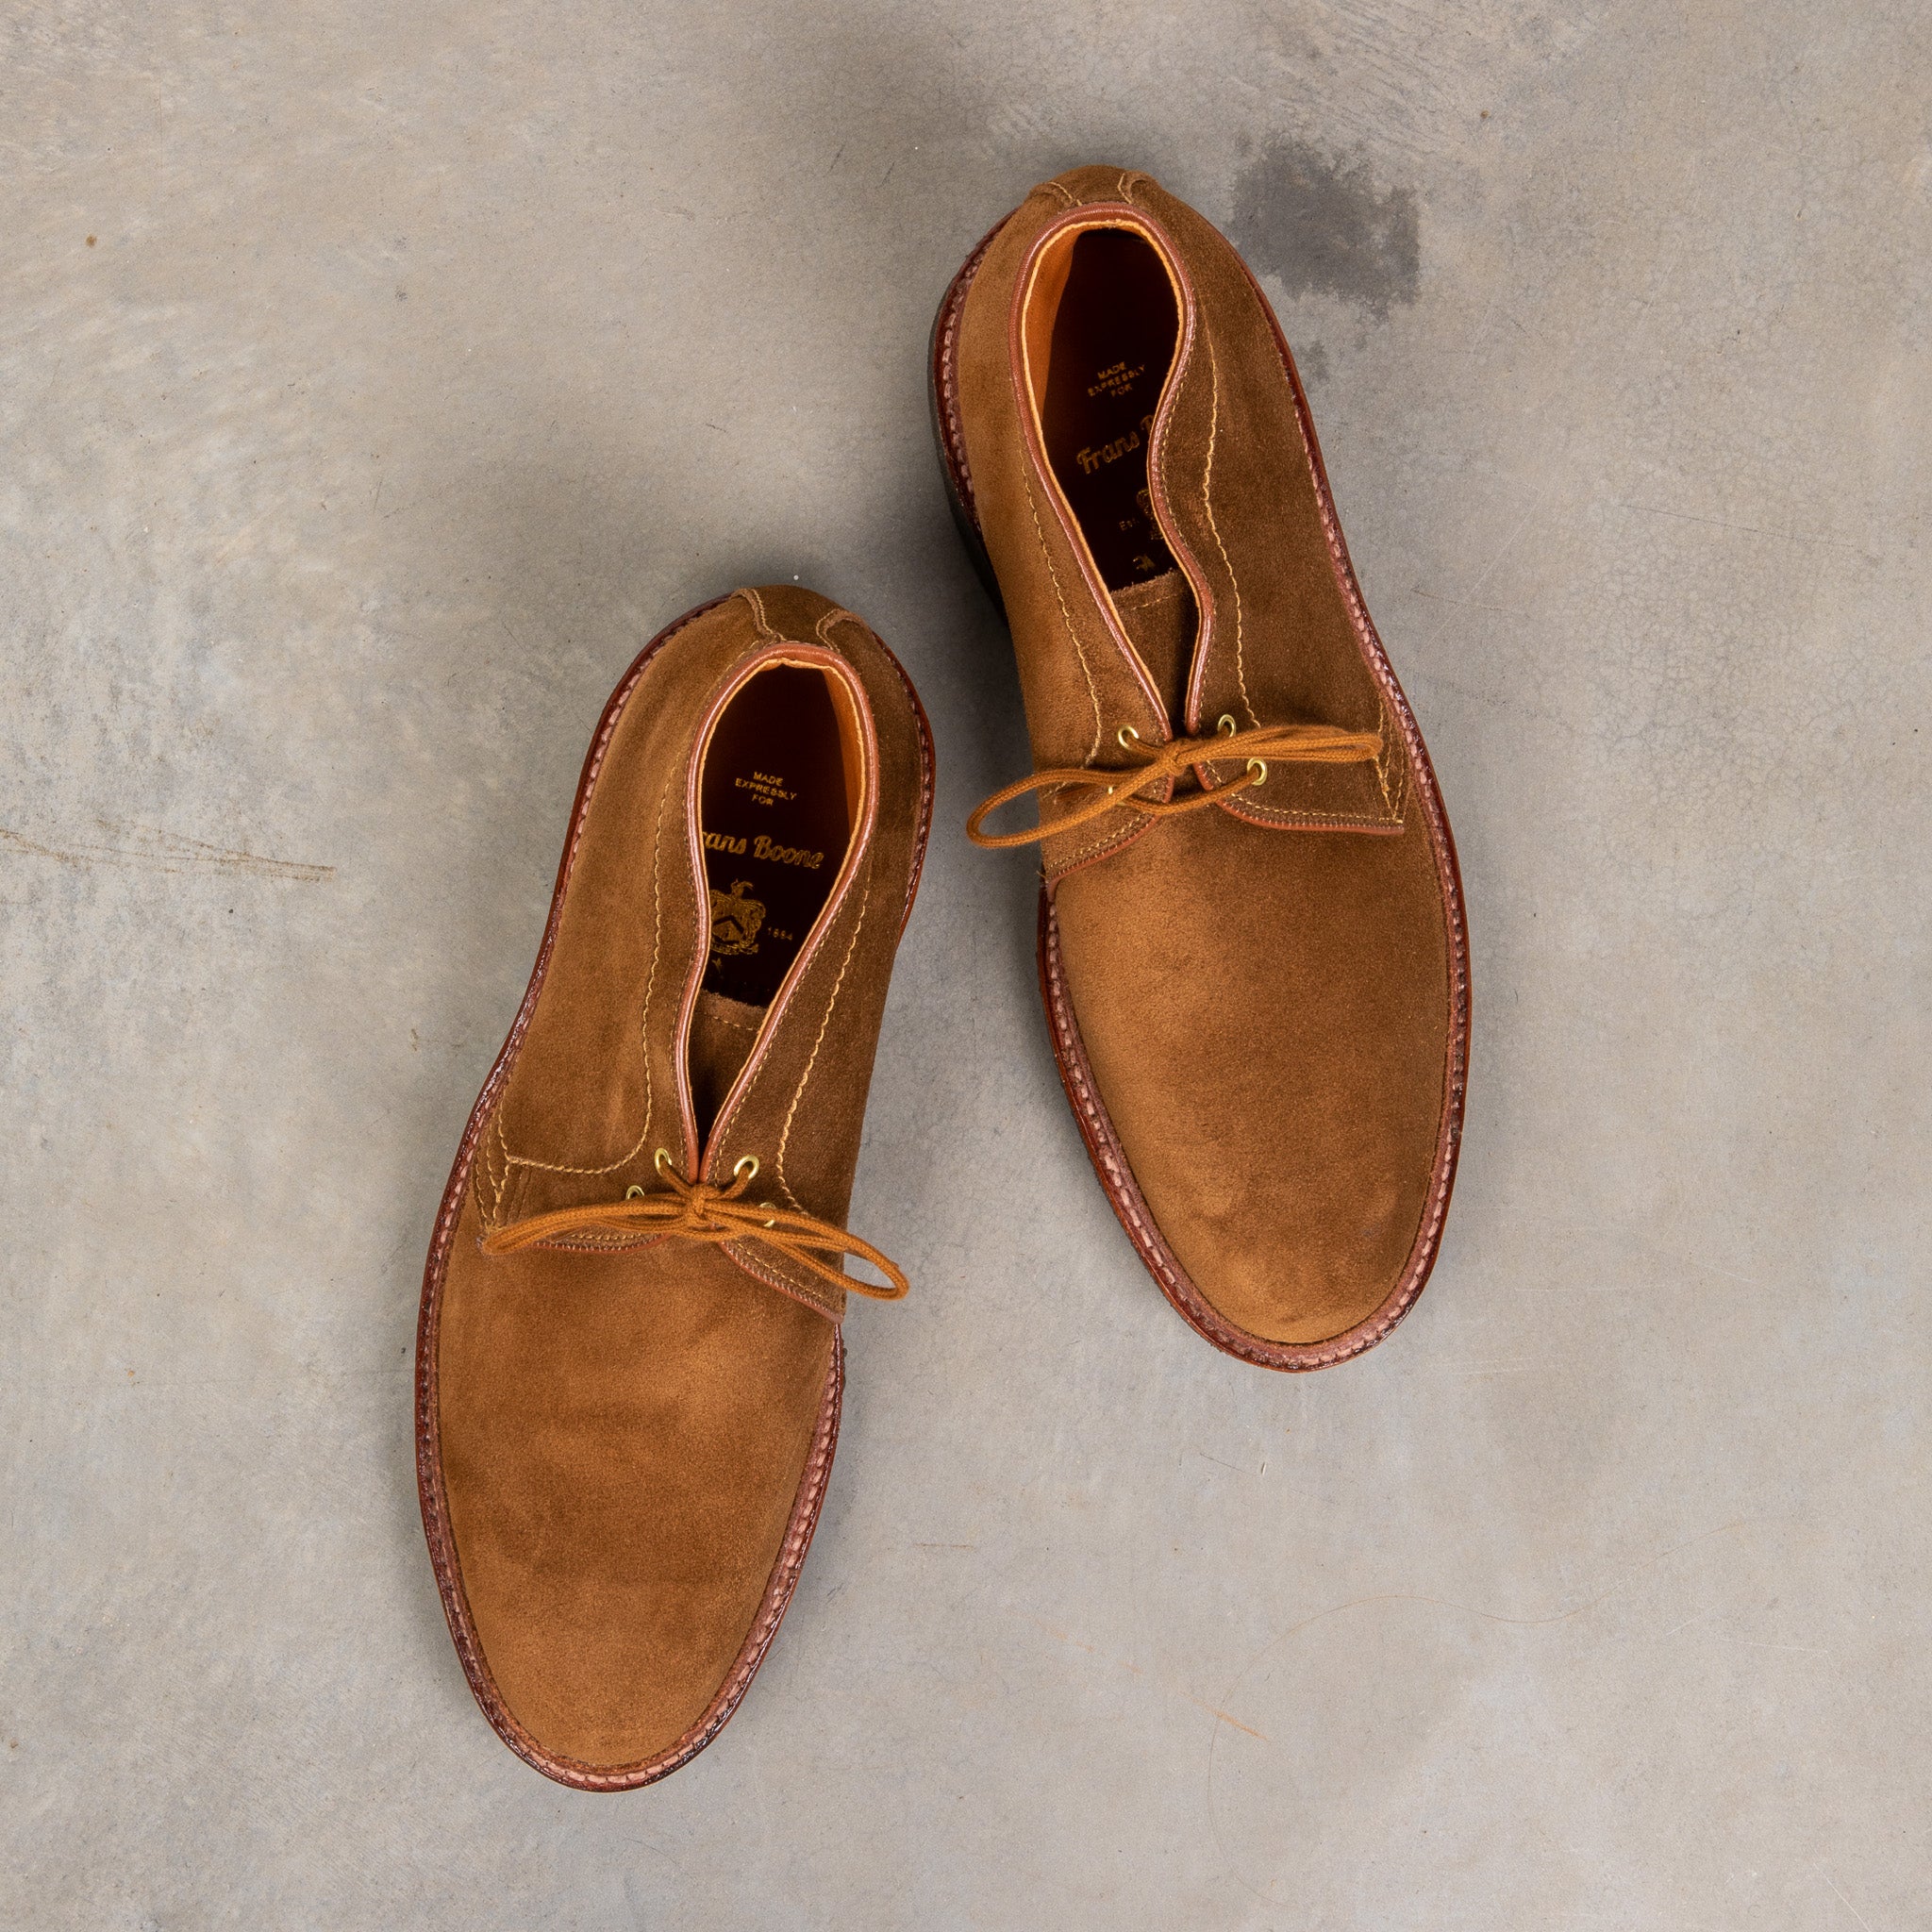 Alden x Frans Boone Chukka Snuff Suede on Crepe Sole